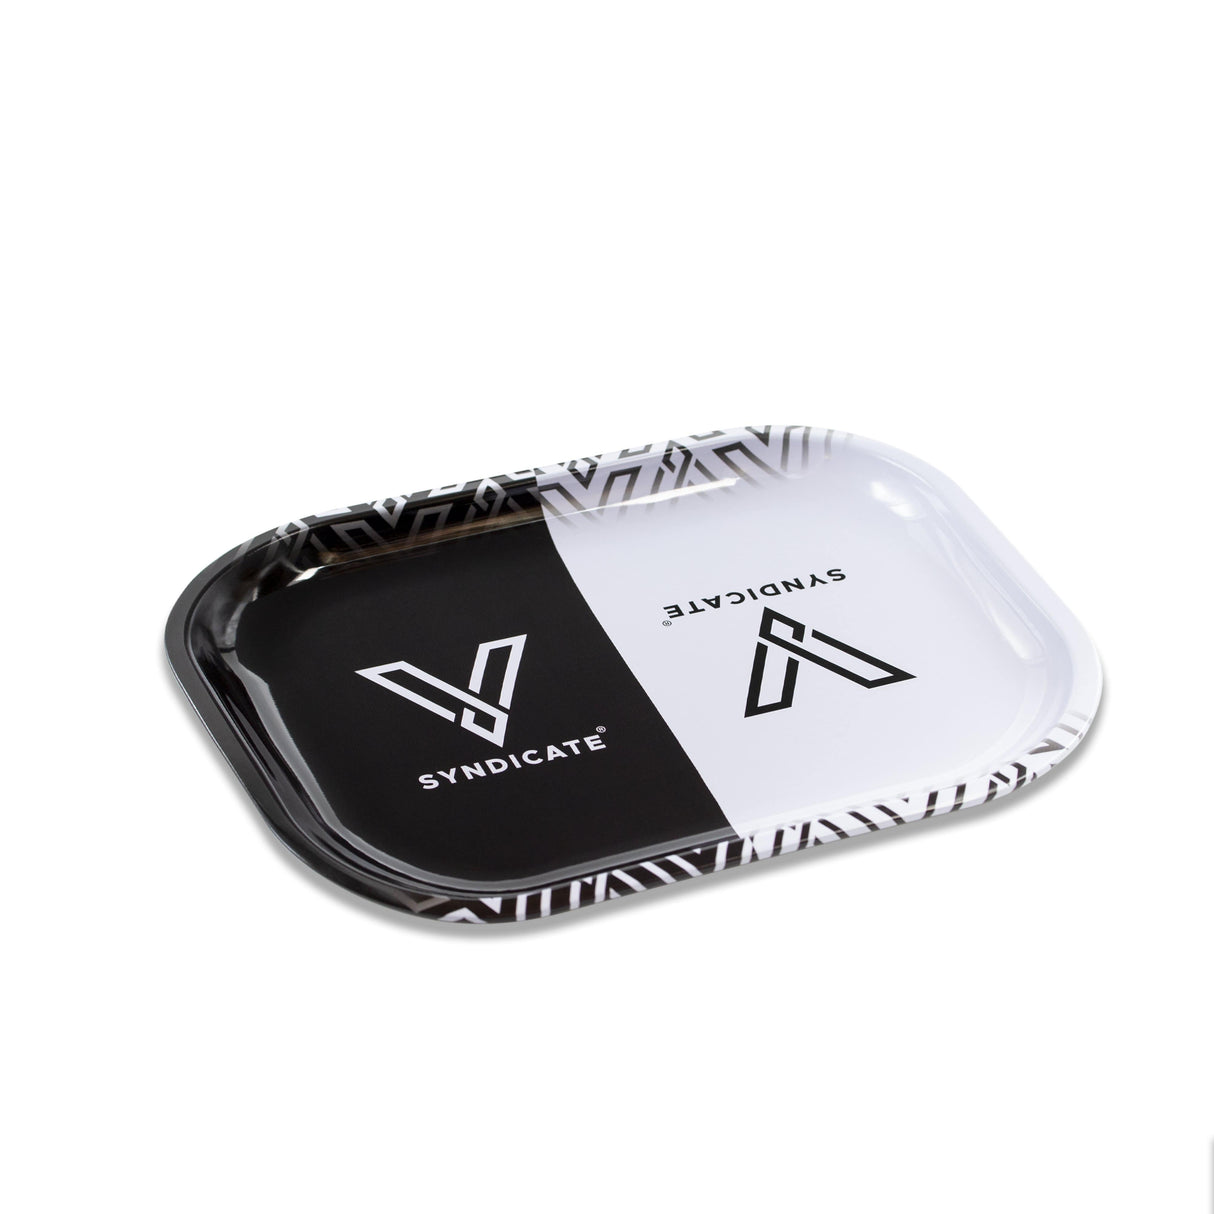 V Syndicate Hybrid Rollin' Tray in black, white, and gray, angled view, perfect for dry herbs and concentrates